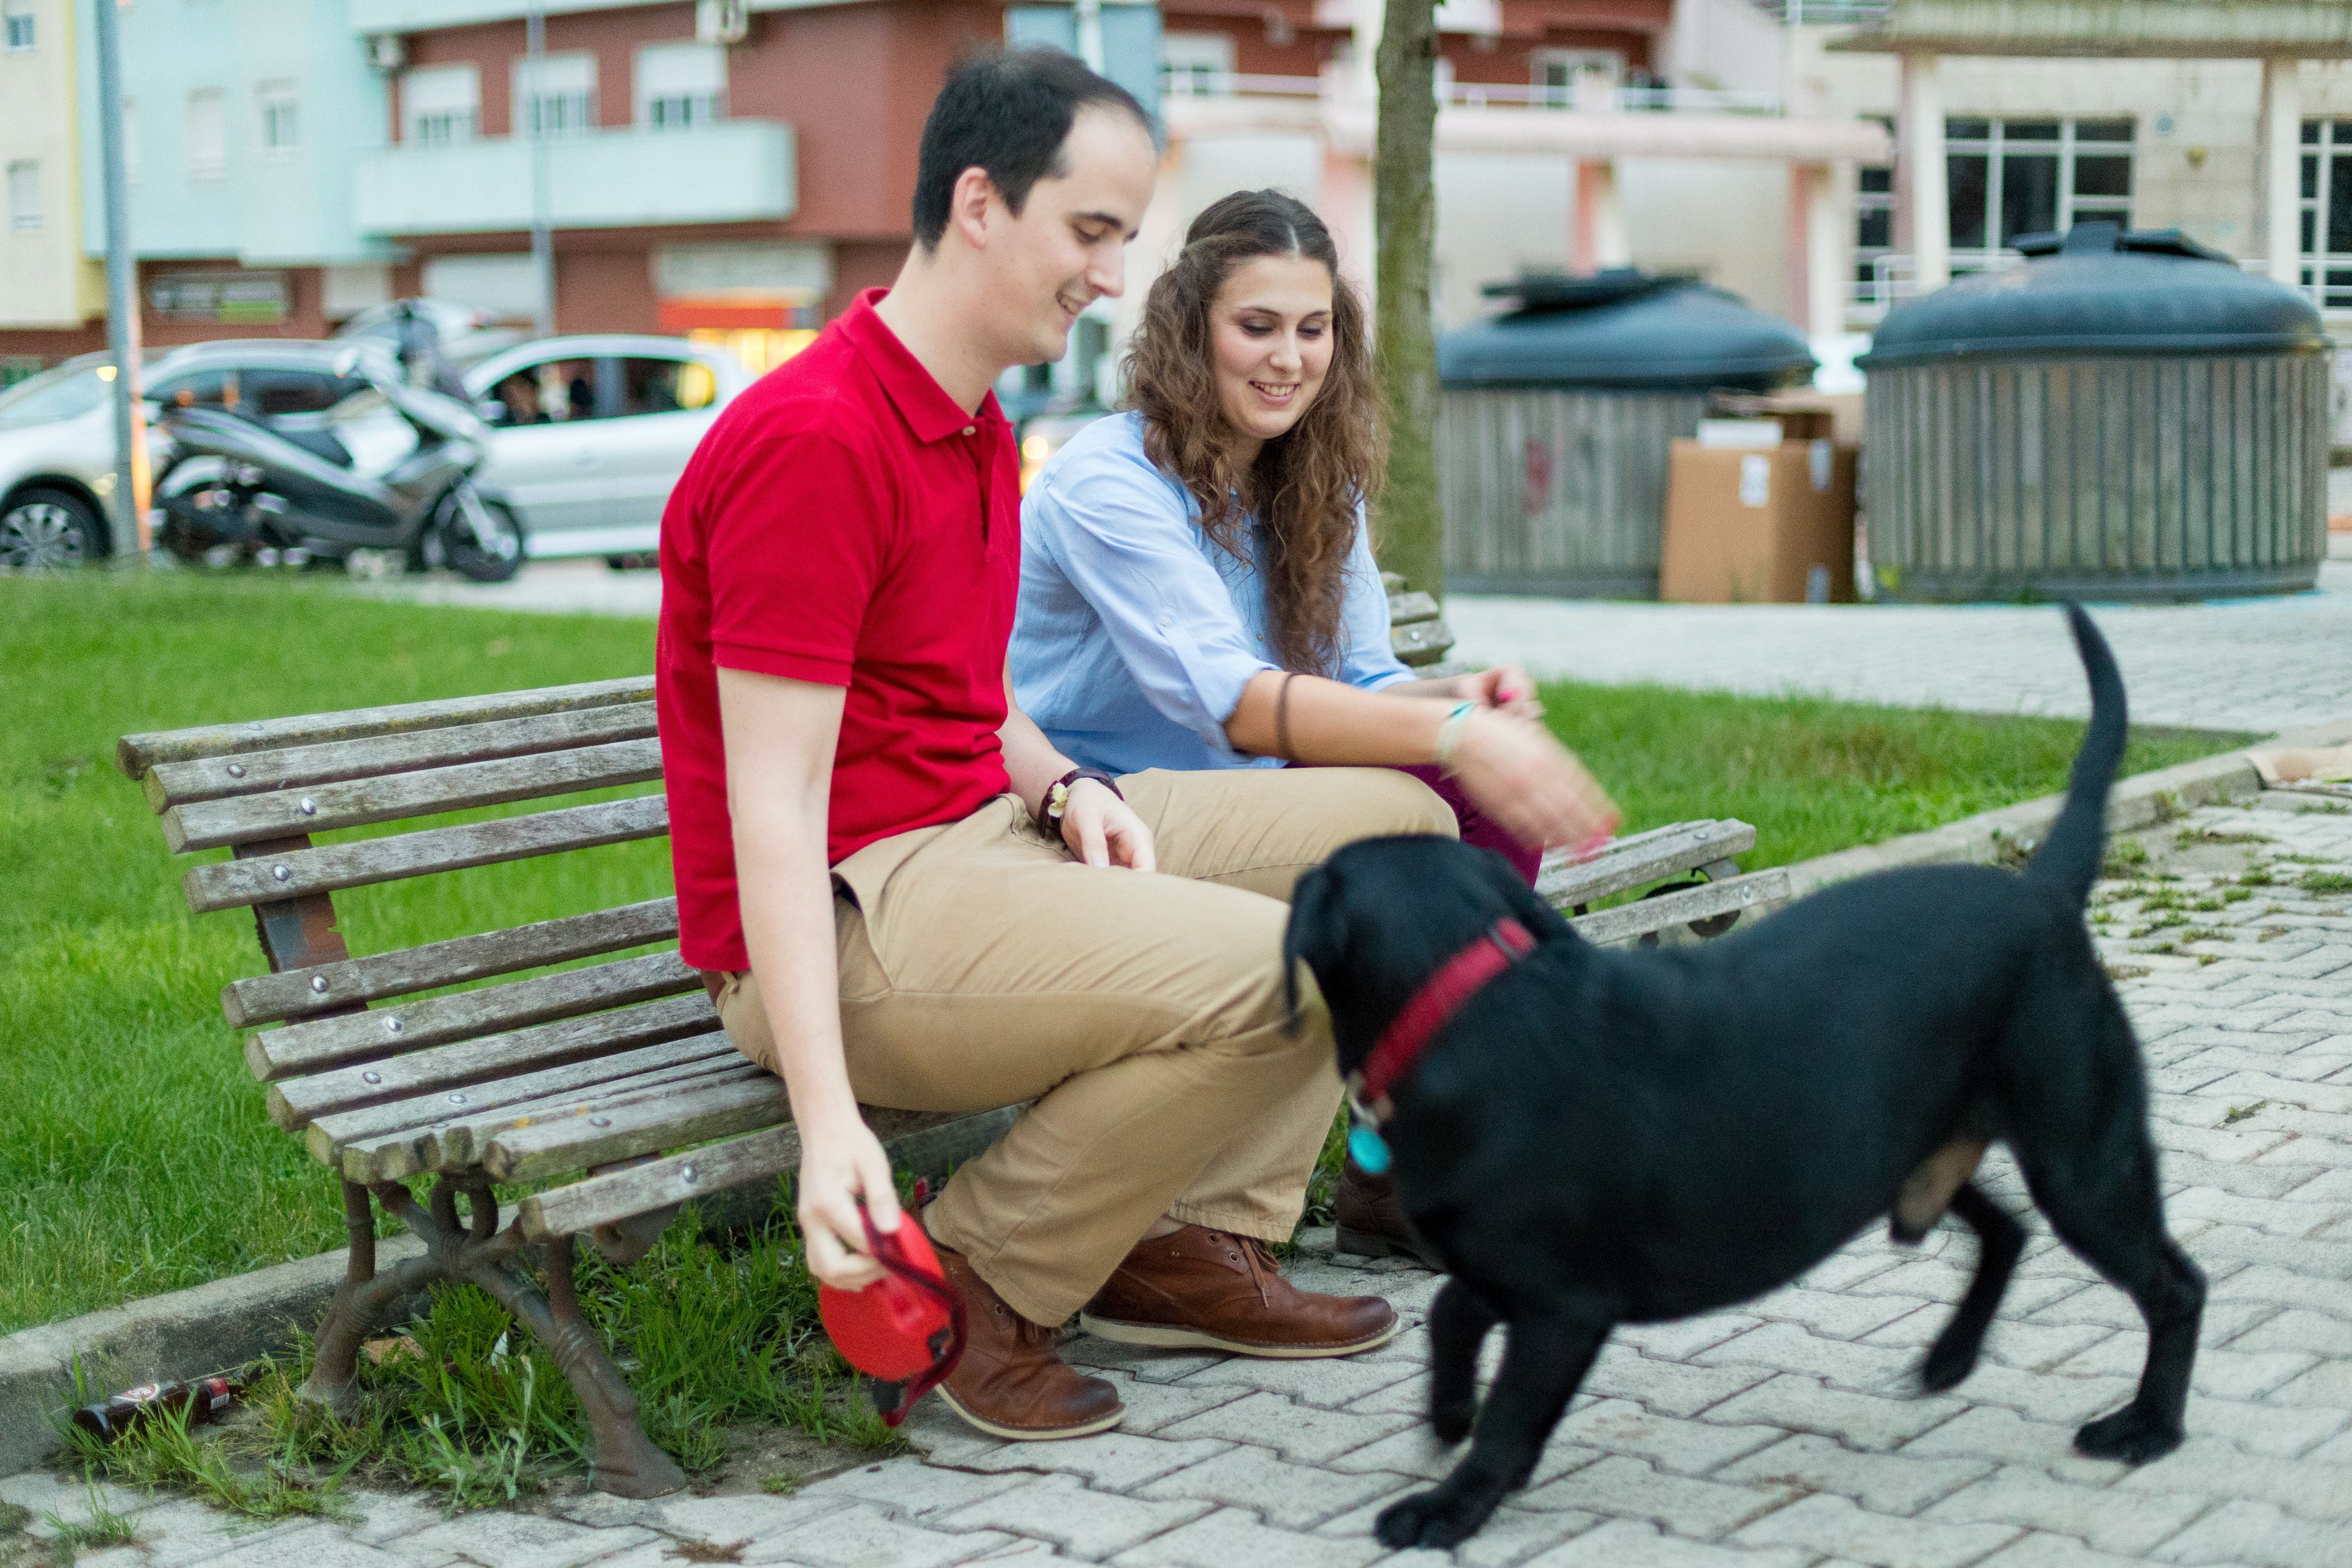 A young couple from Portugal sits on a bench and plays with a dog.